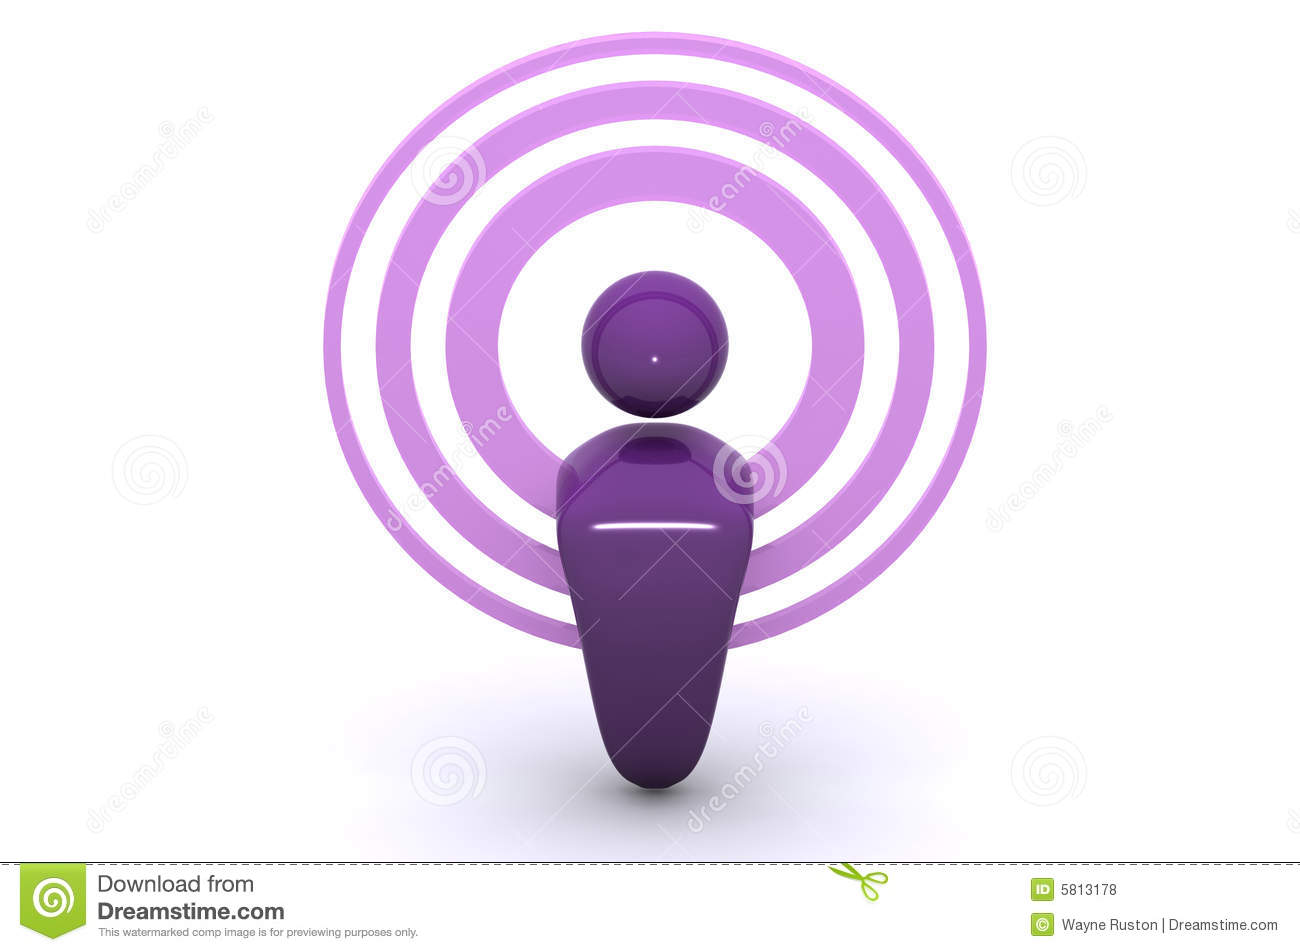 Podcasting   Wireless Royalty Free Stock Photos   Image  5813178